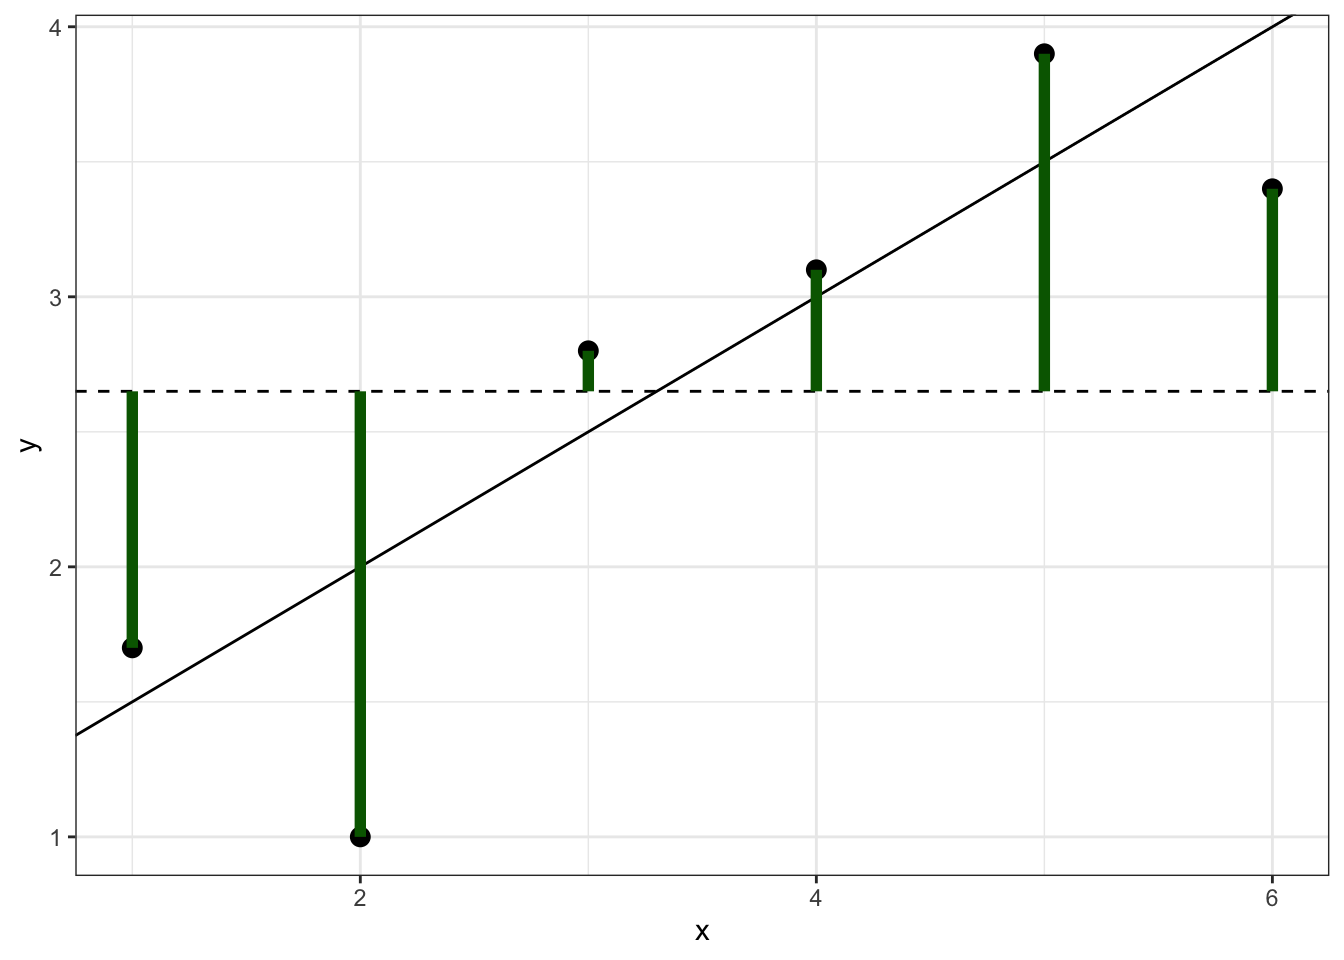 Simulated data showing $SS_{tot}$, which is the sum of the squared lengths of the green lines.